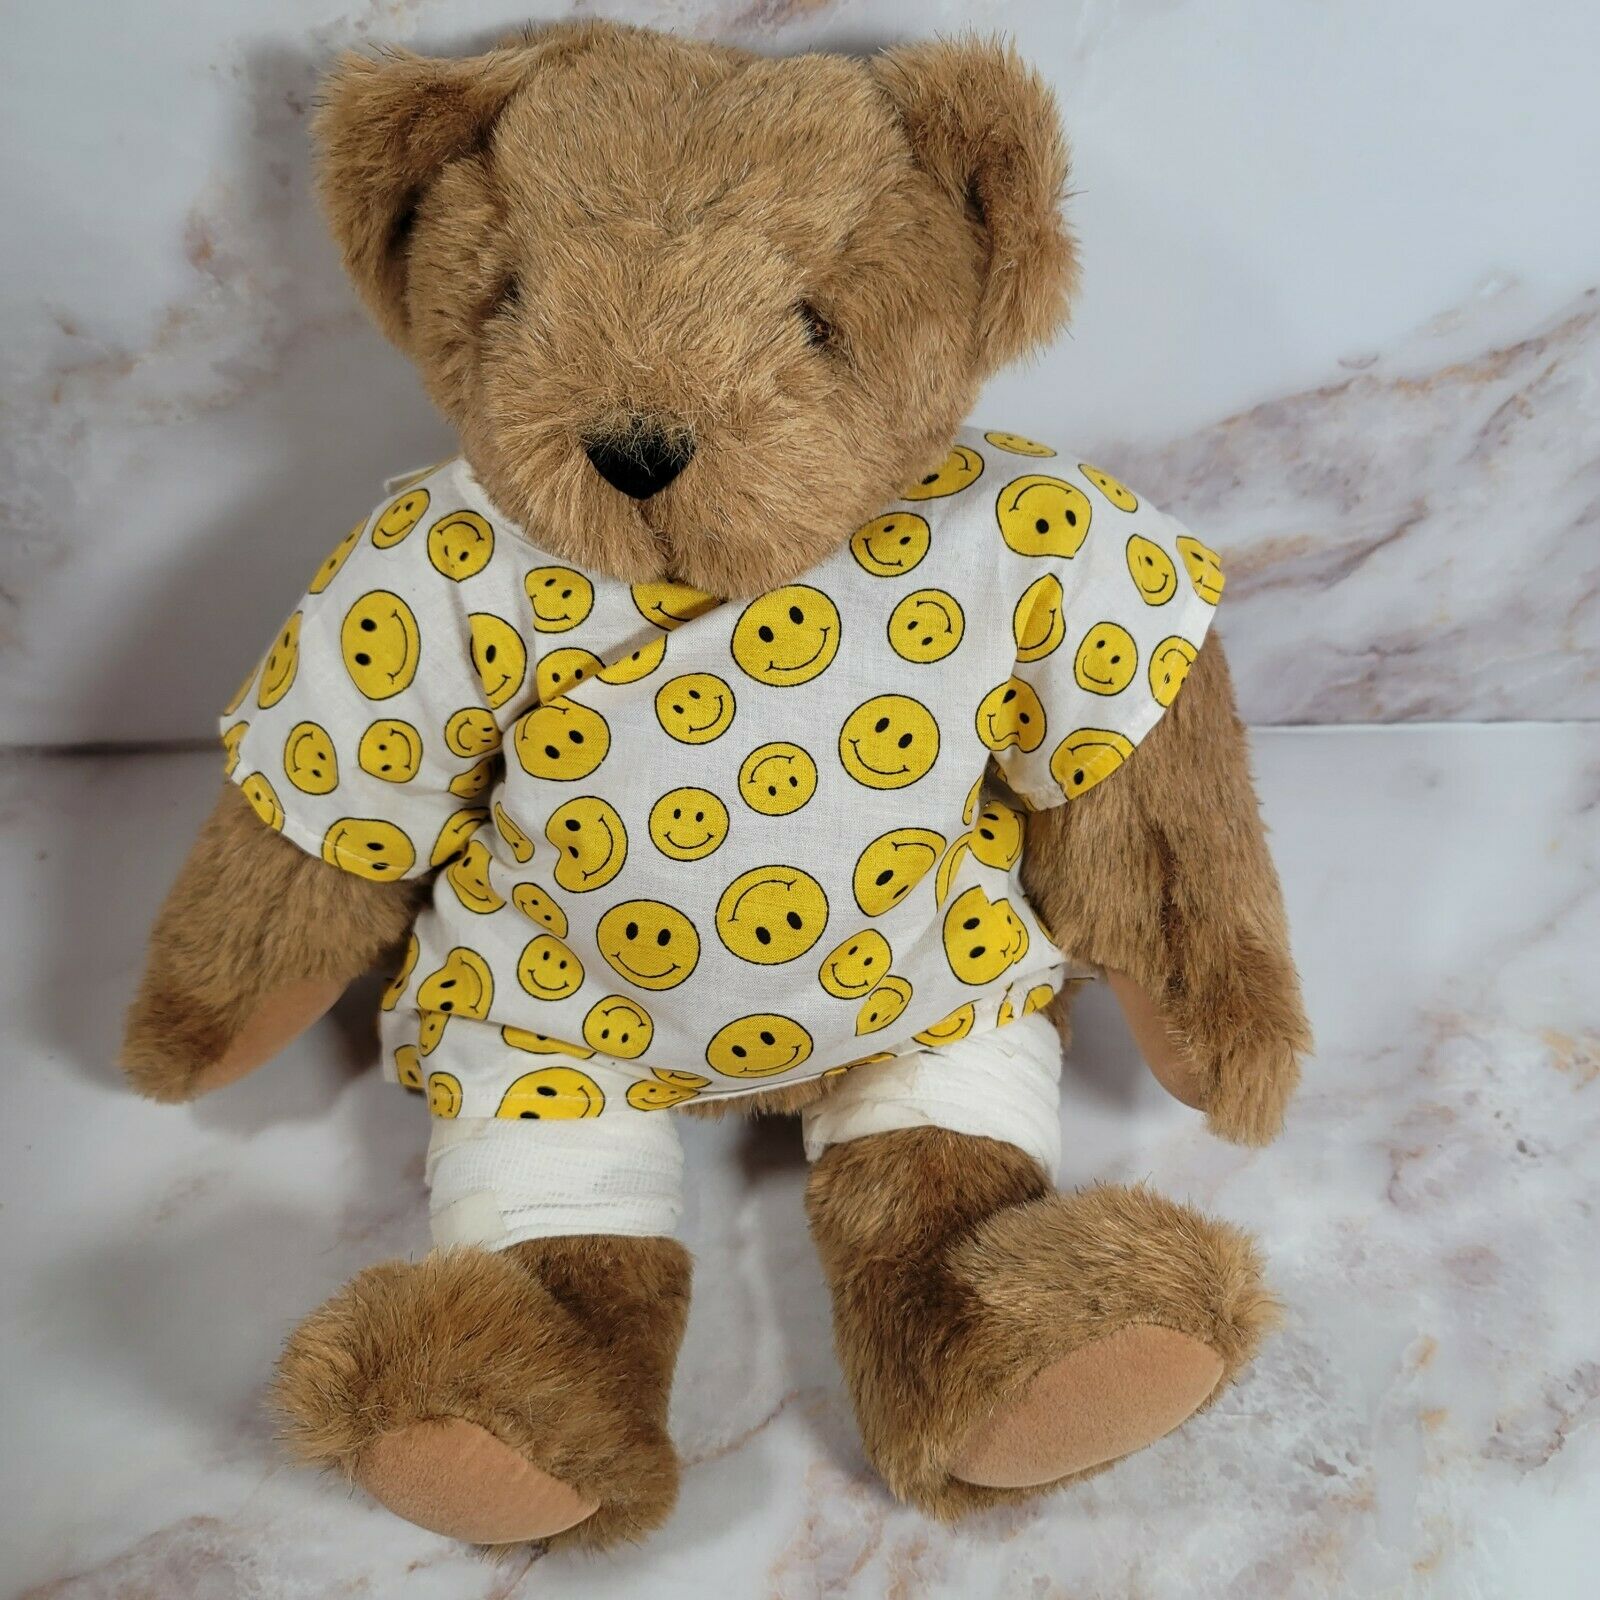 Vermont 15" Teddy Bear Brown Jointed Bear Smiley Face Hospital Gown Stuffed Toy